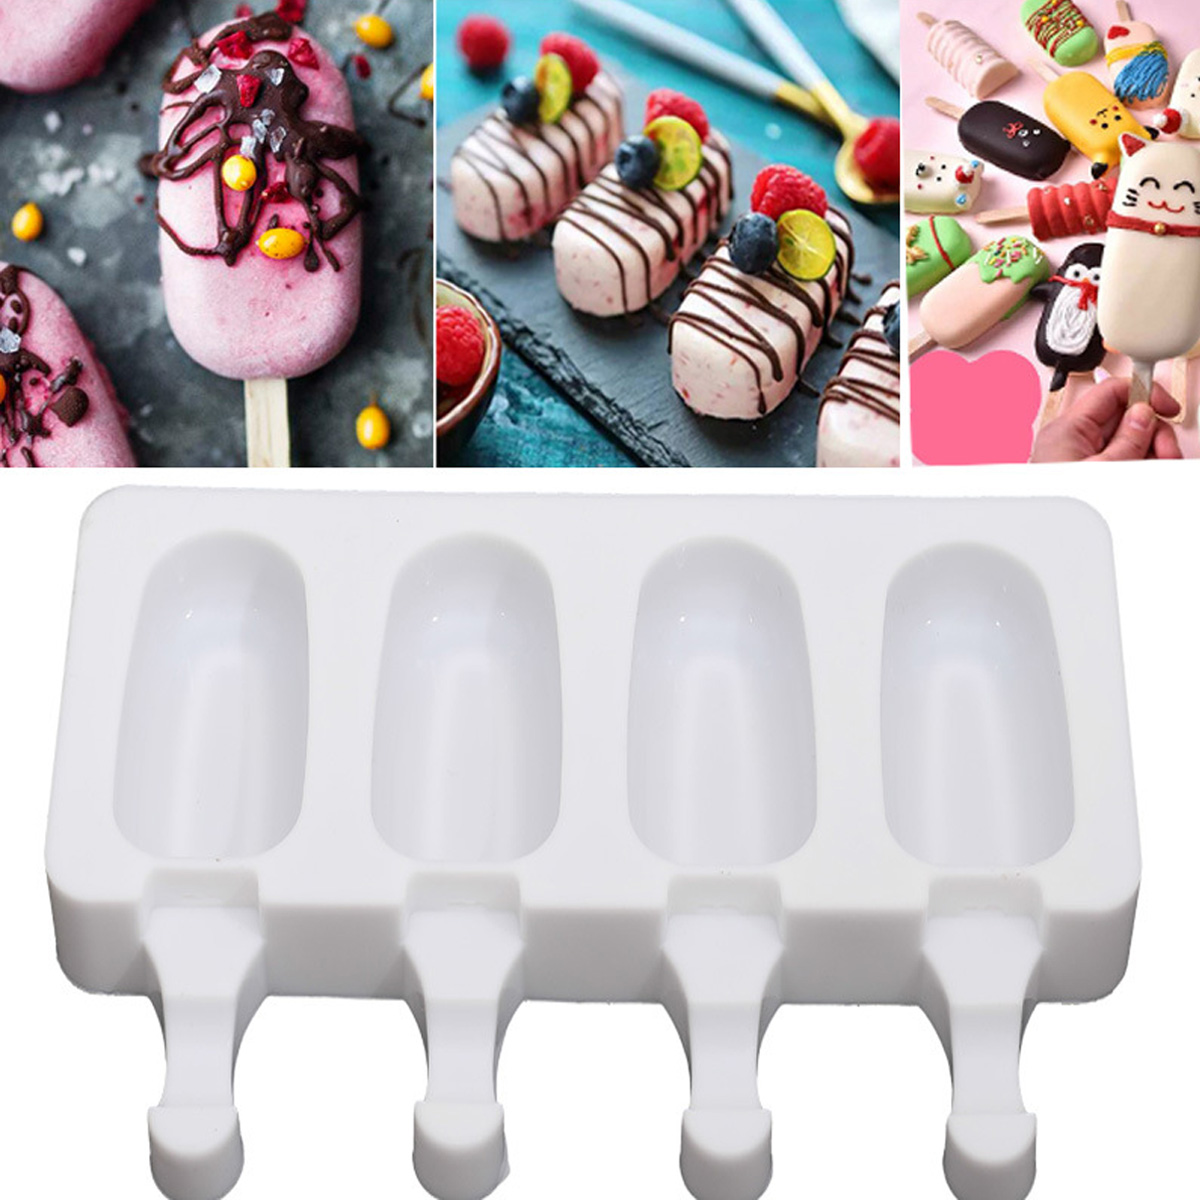 

4 Cell Silicone Frozen Ice Cream Mold Juice Popsicle Maker Ice Lolly Pop Mould